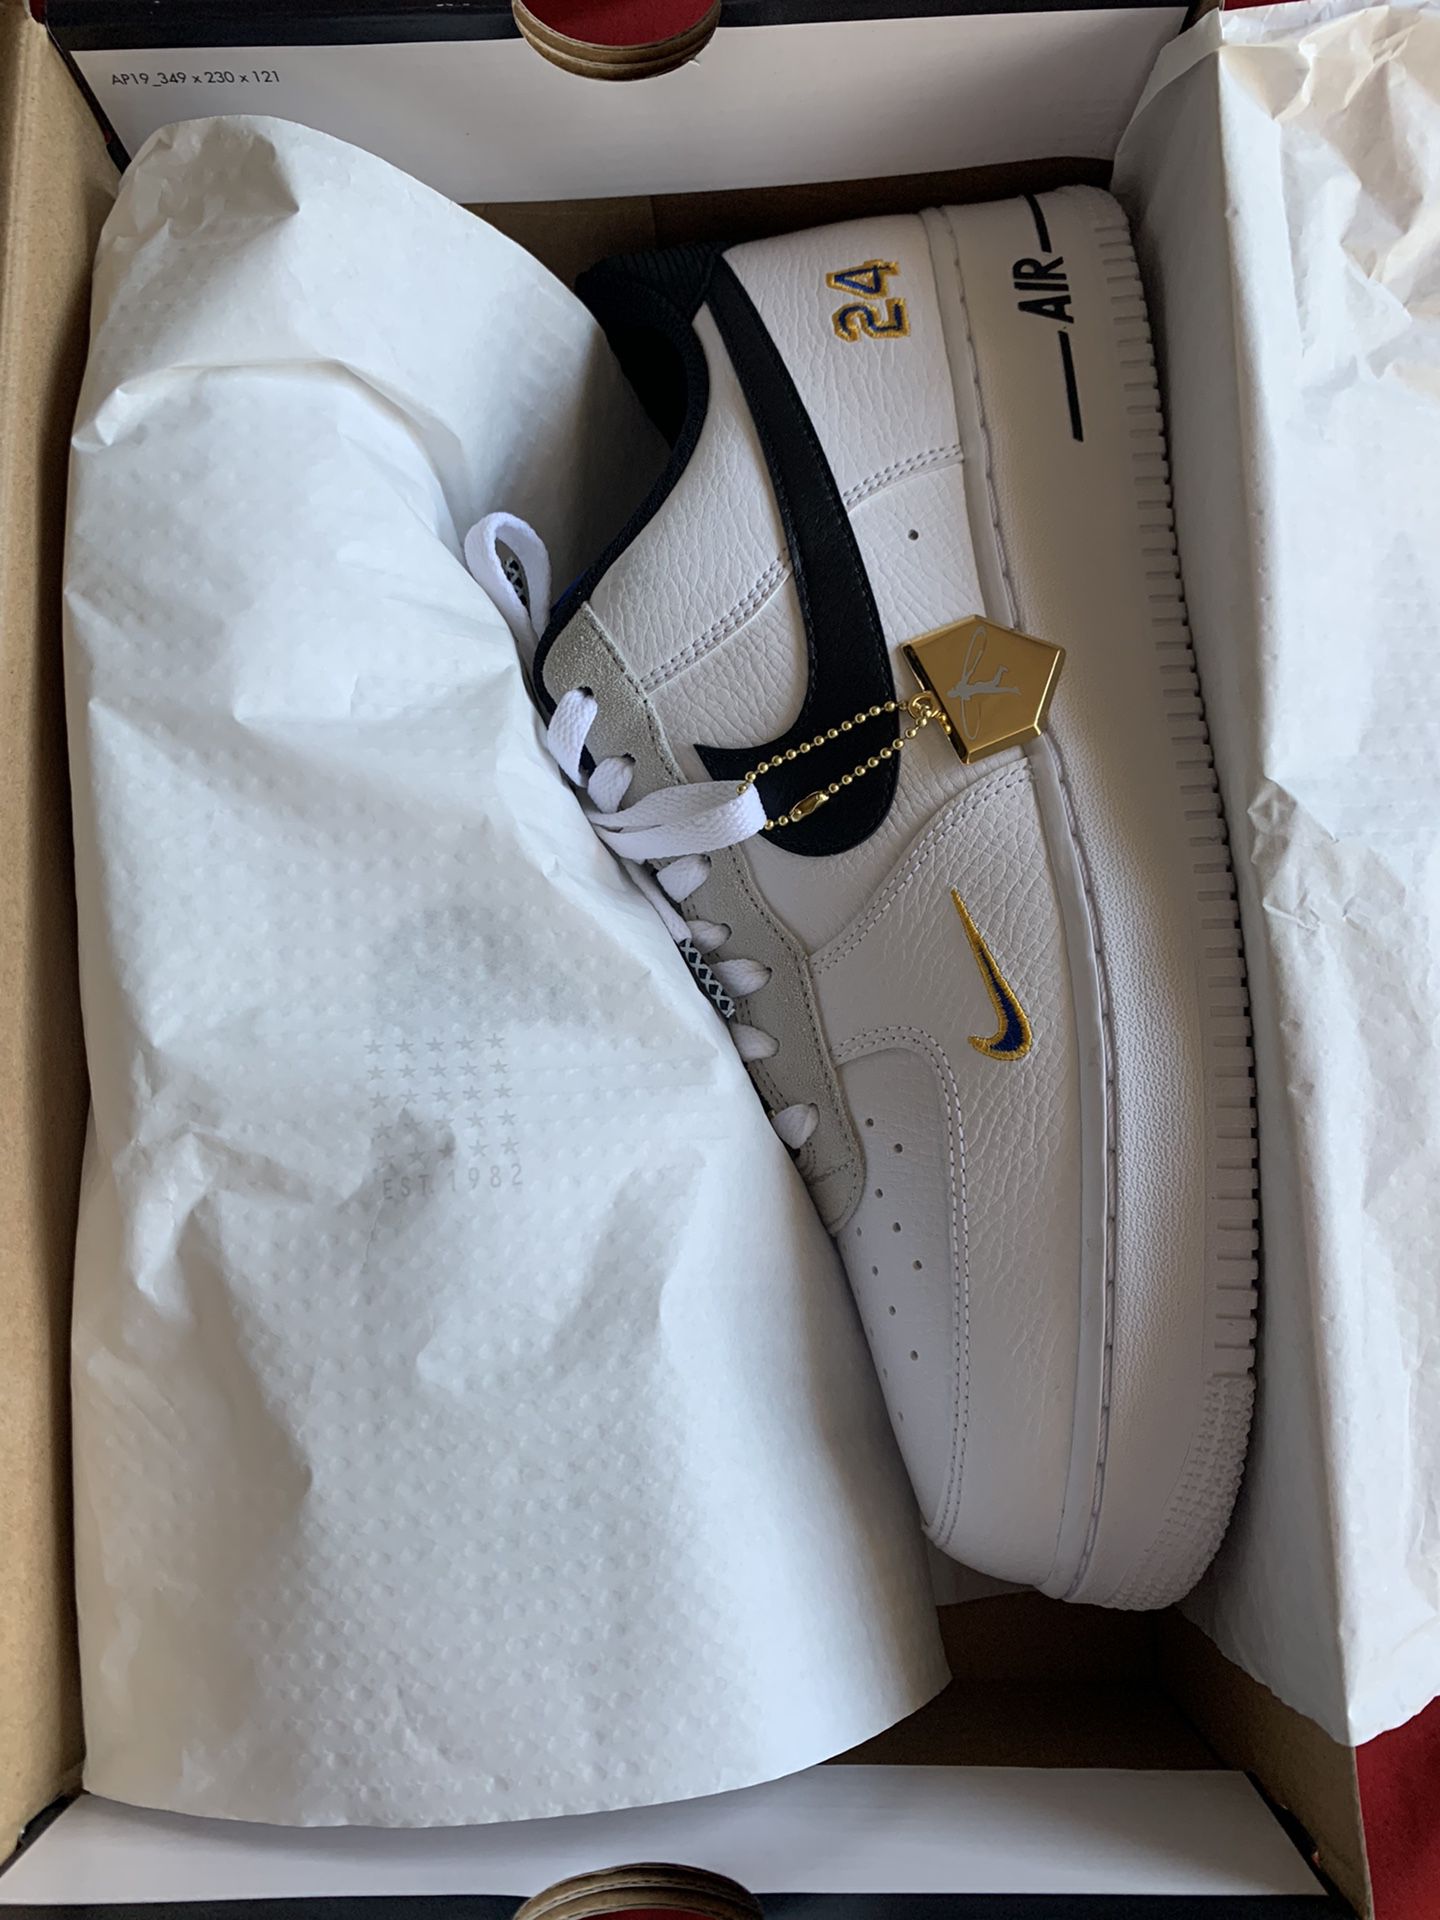 Authentic Nike Air Force 1 07 LV8 x Ken Griffey Jr Shoes Mens Size 10 for  Sale in Massapequa Park, NY - OfferUp